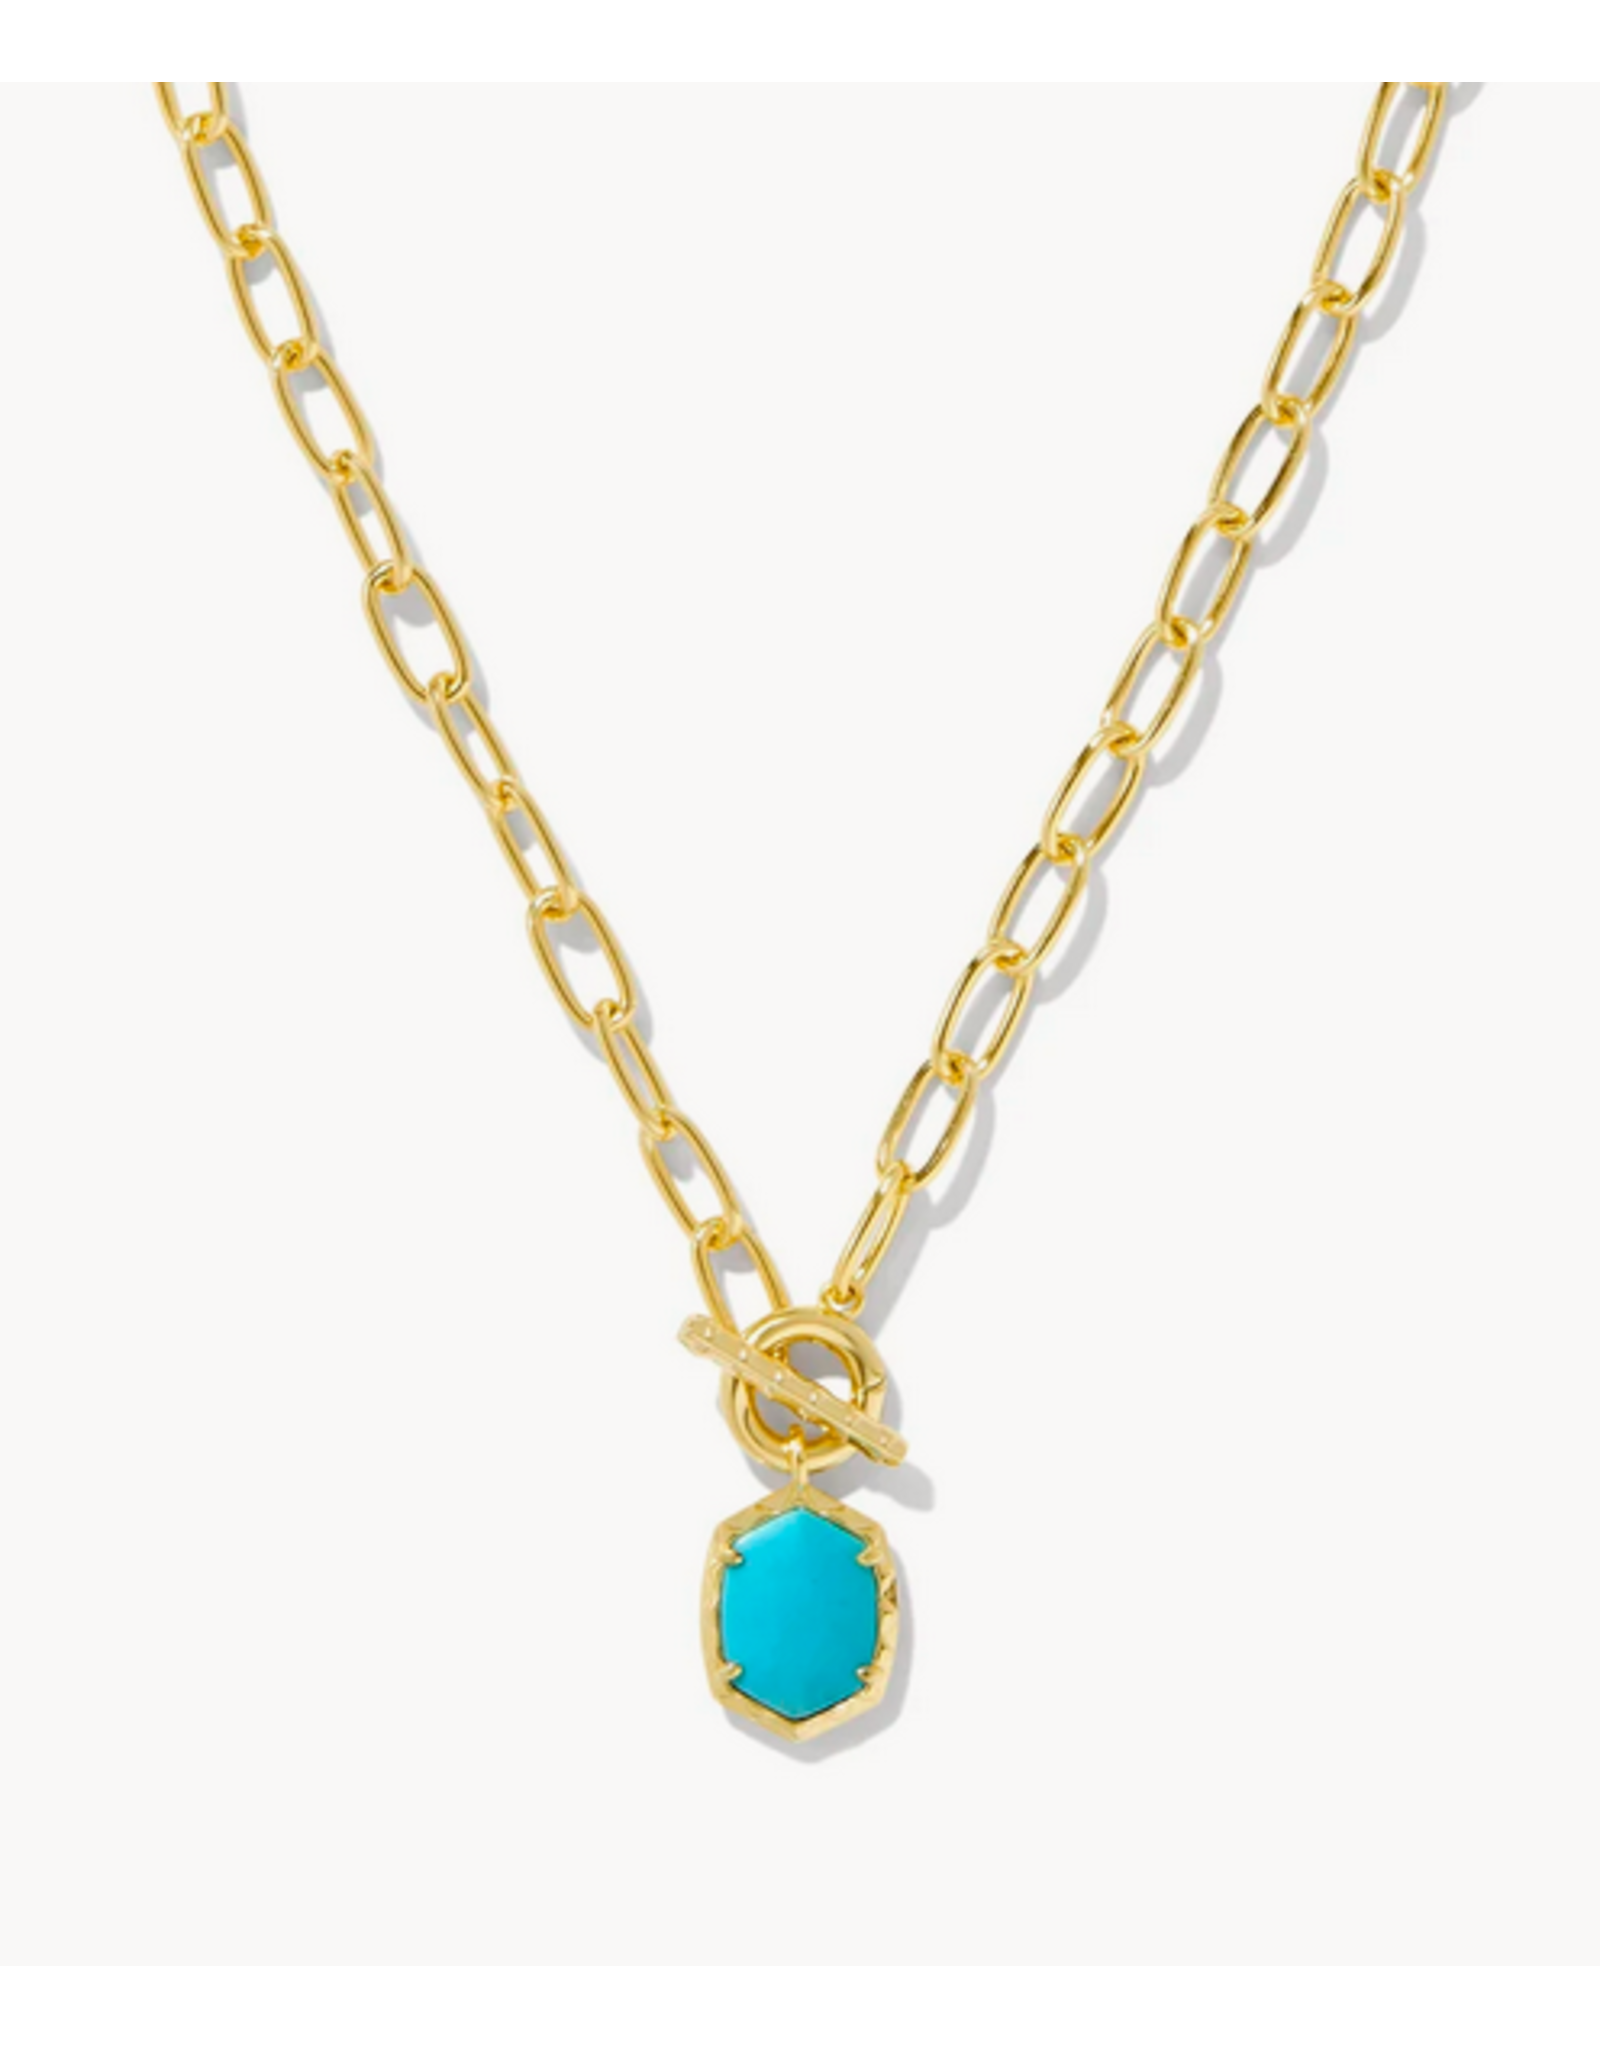 Kendra Scott Daphne Link Chain Necklace Gold Variegated Turq